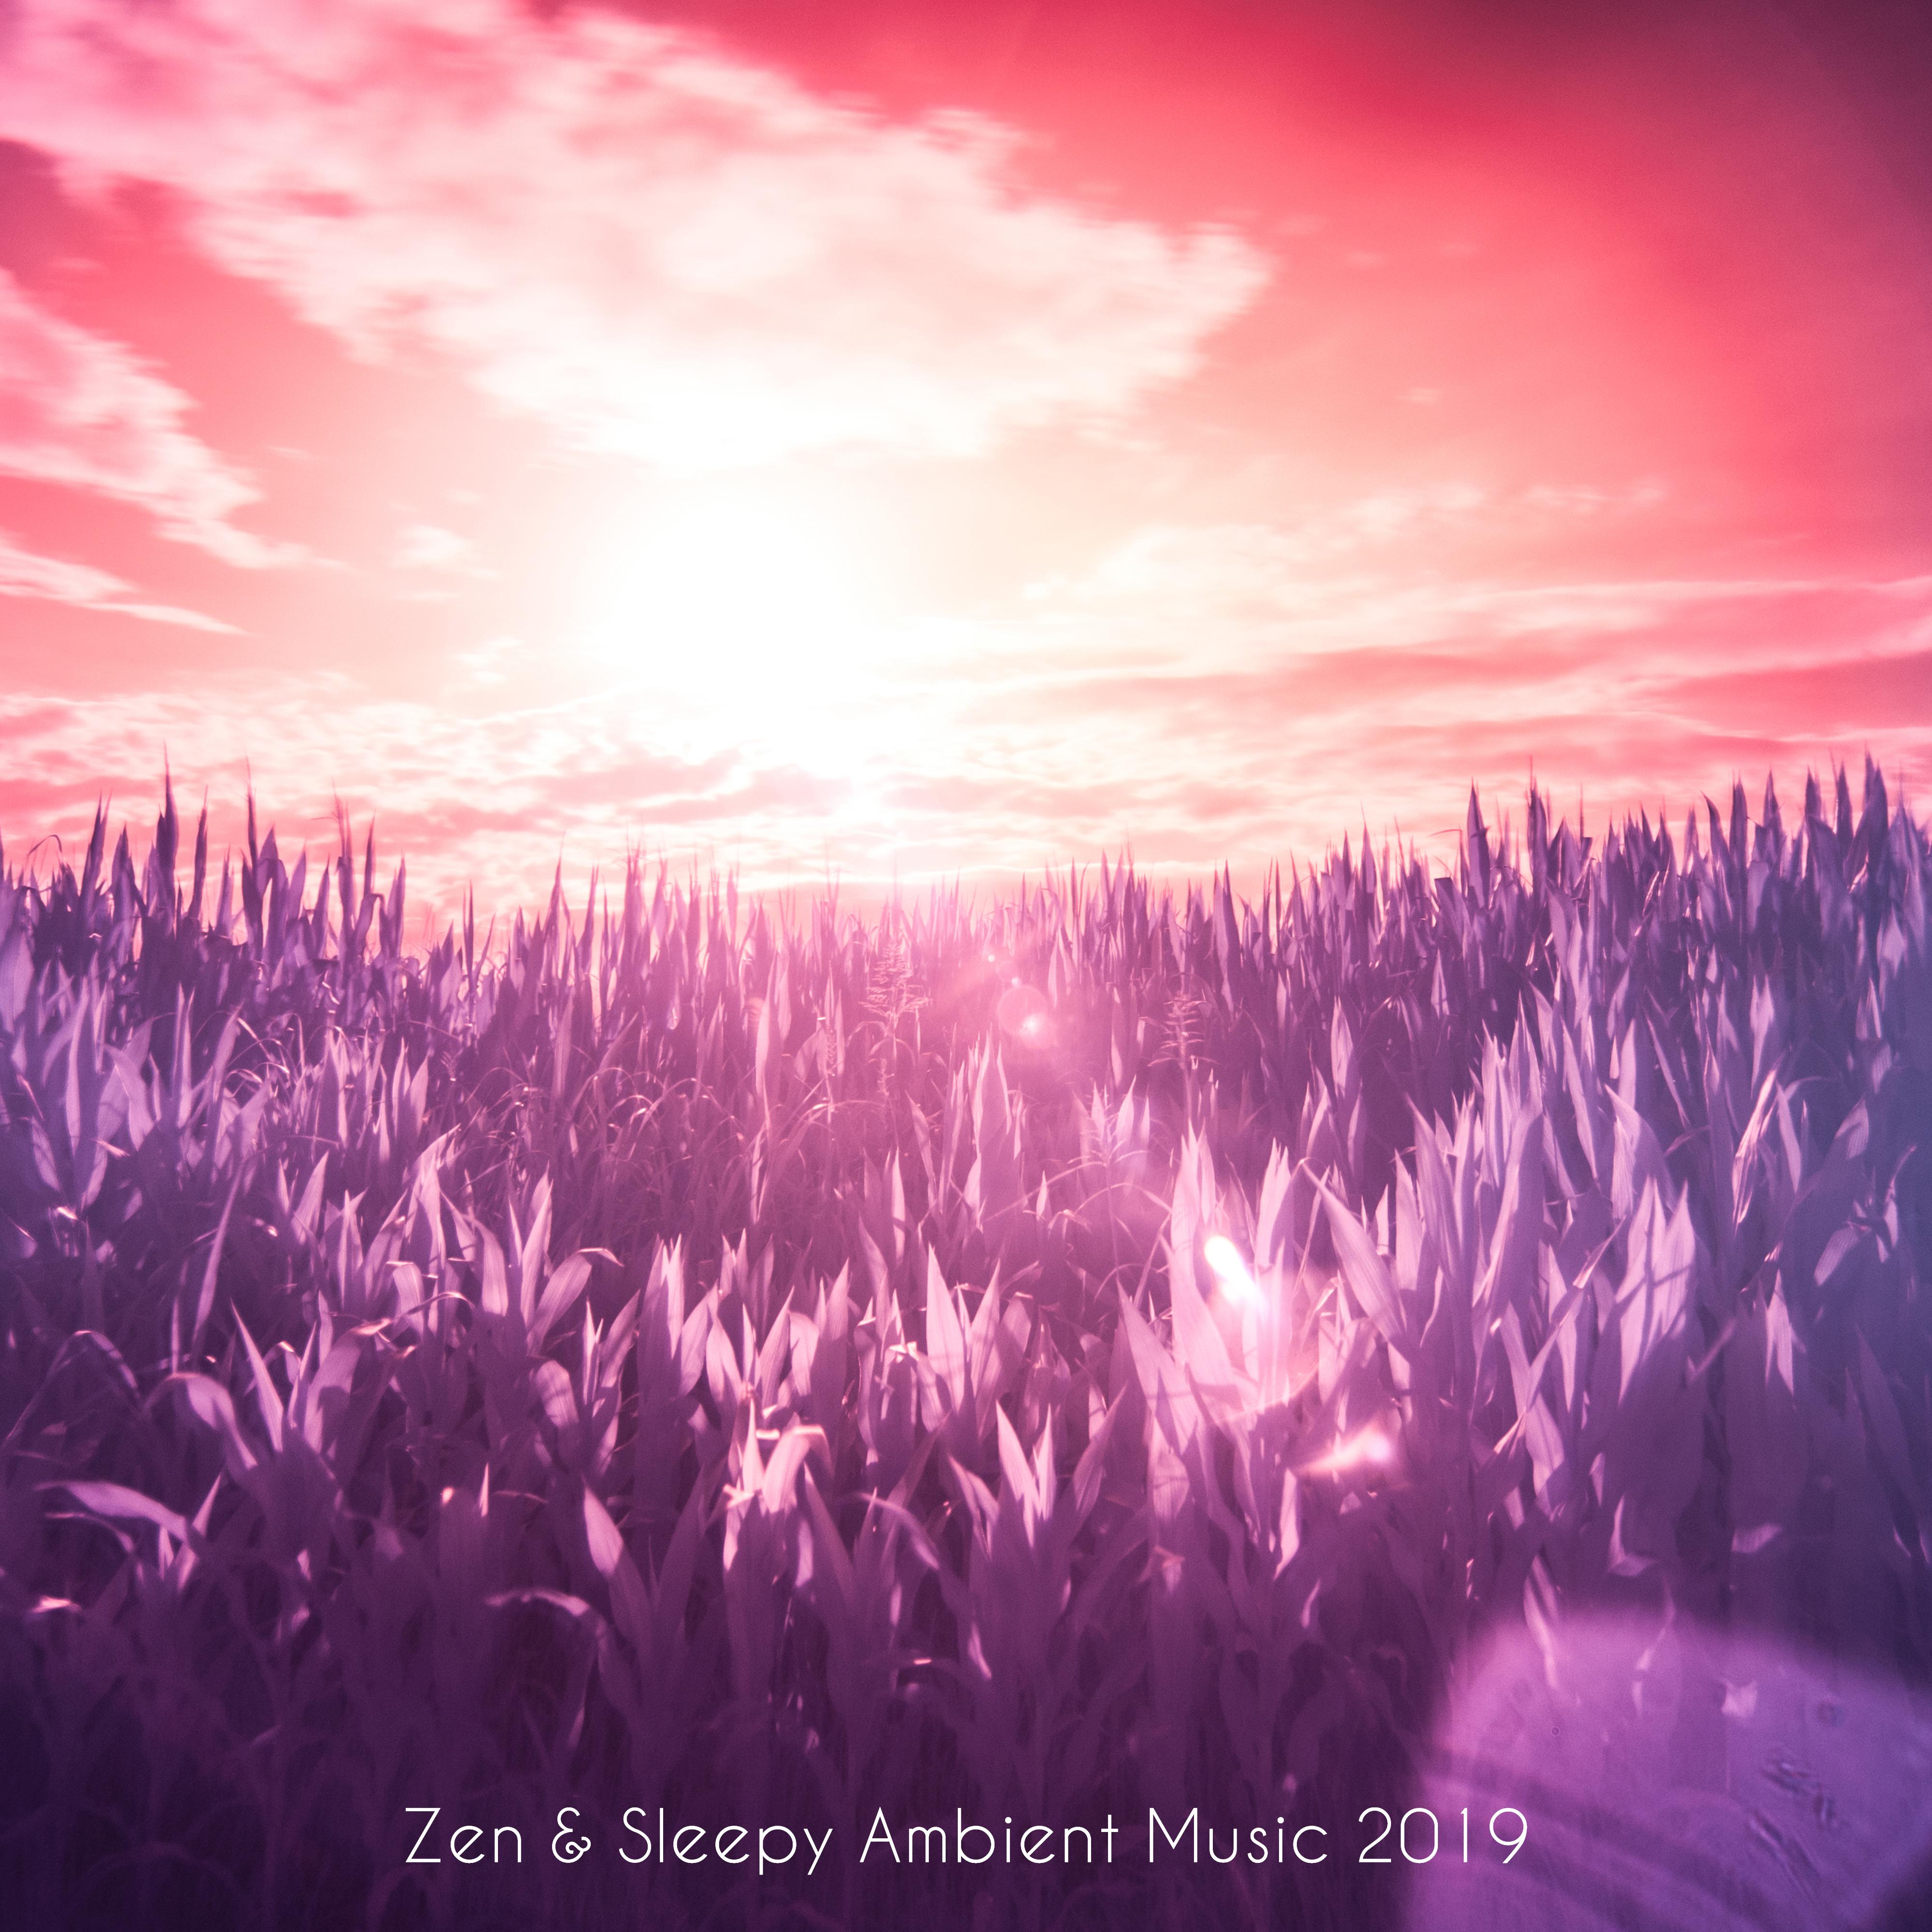 Zen and Sleepy Ambient Music Dedicated to Sleep and Meditation at Bedtime